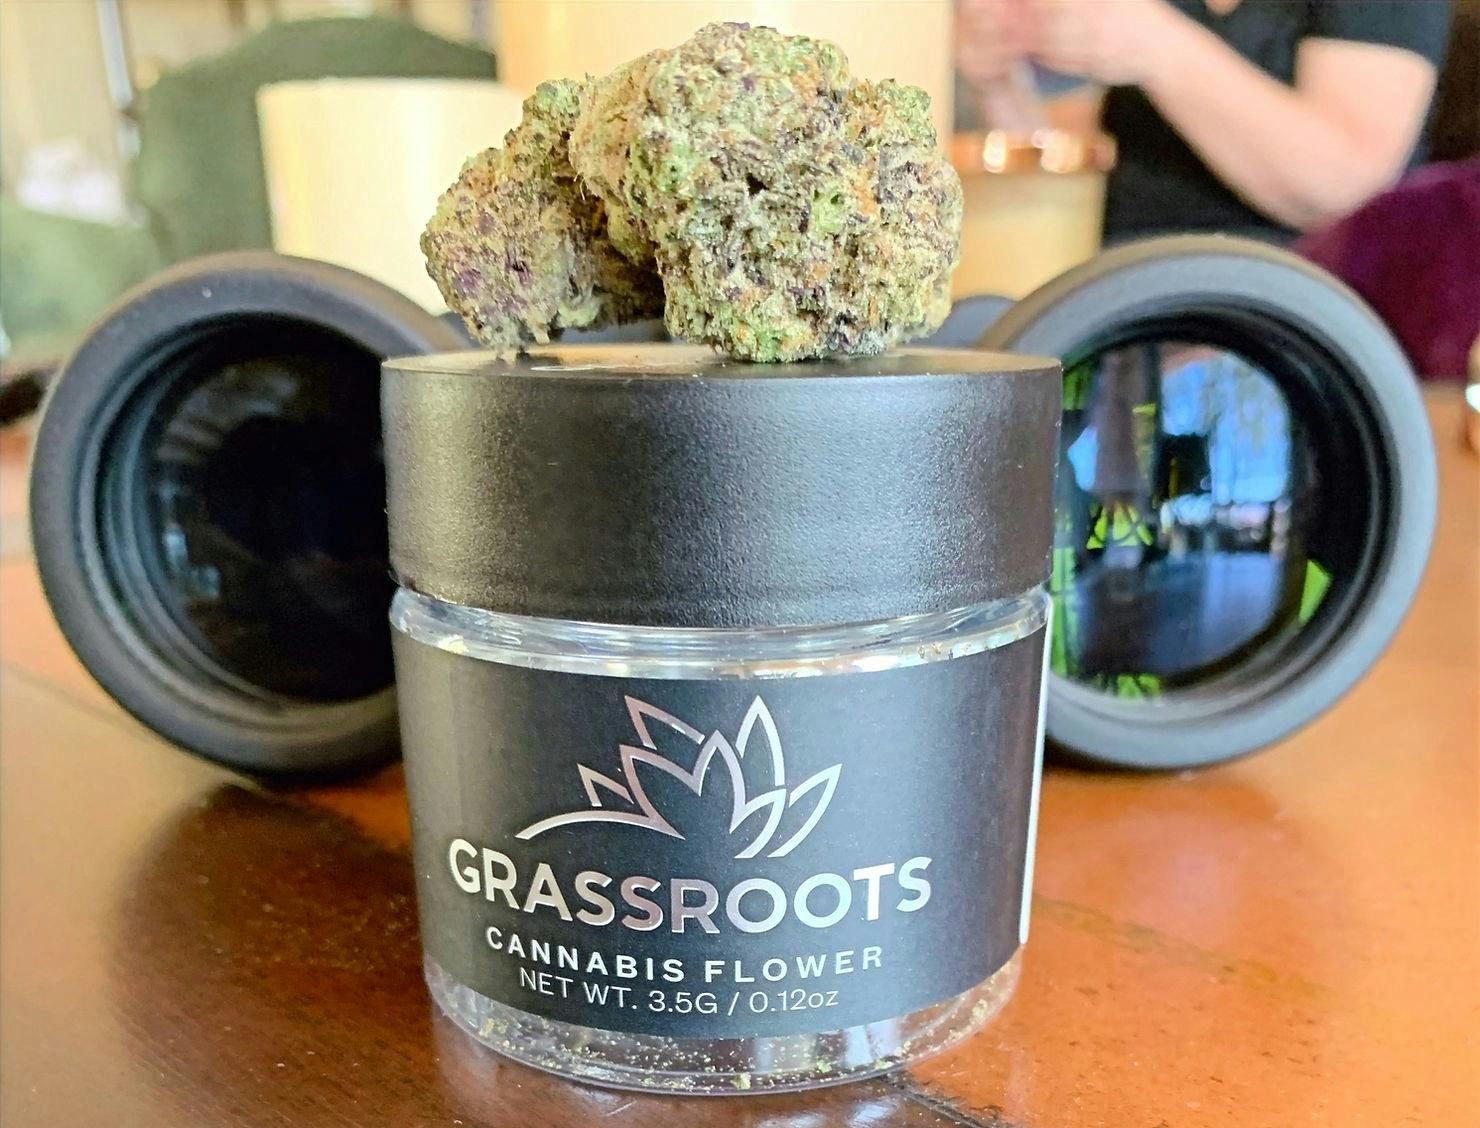 Back to Our Roots with Grassroots Cannabis